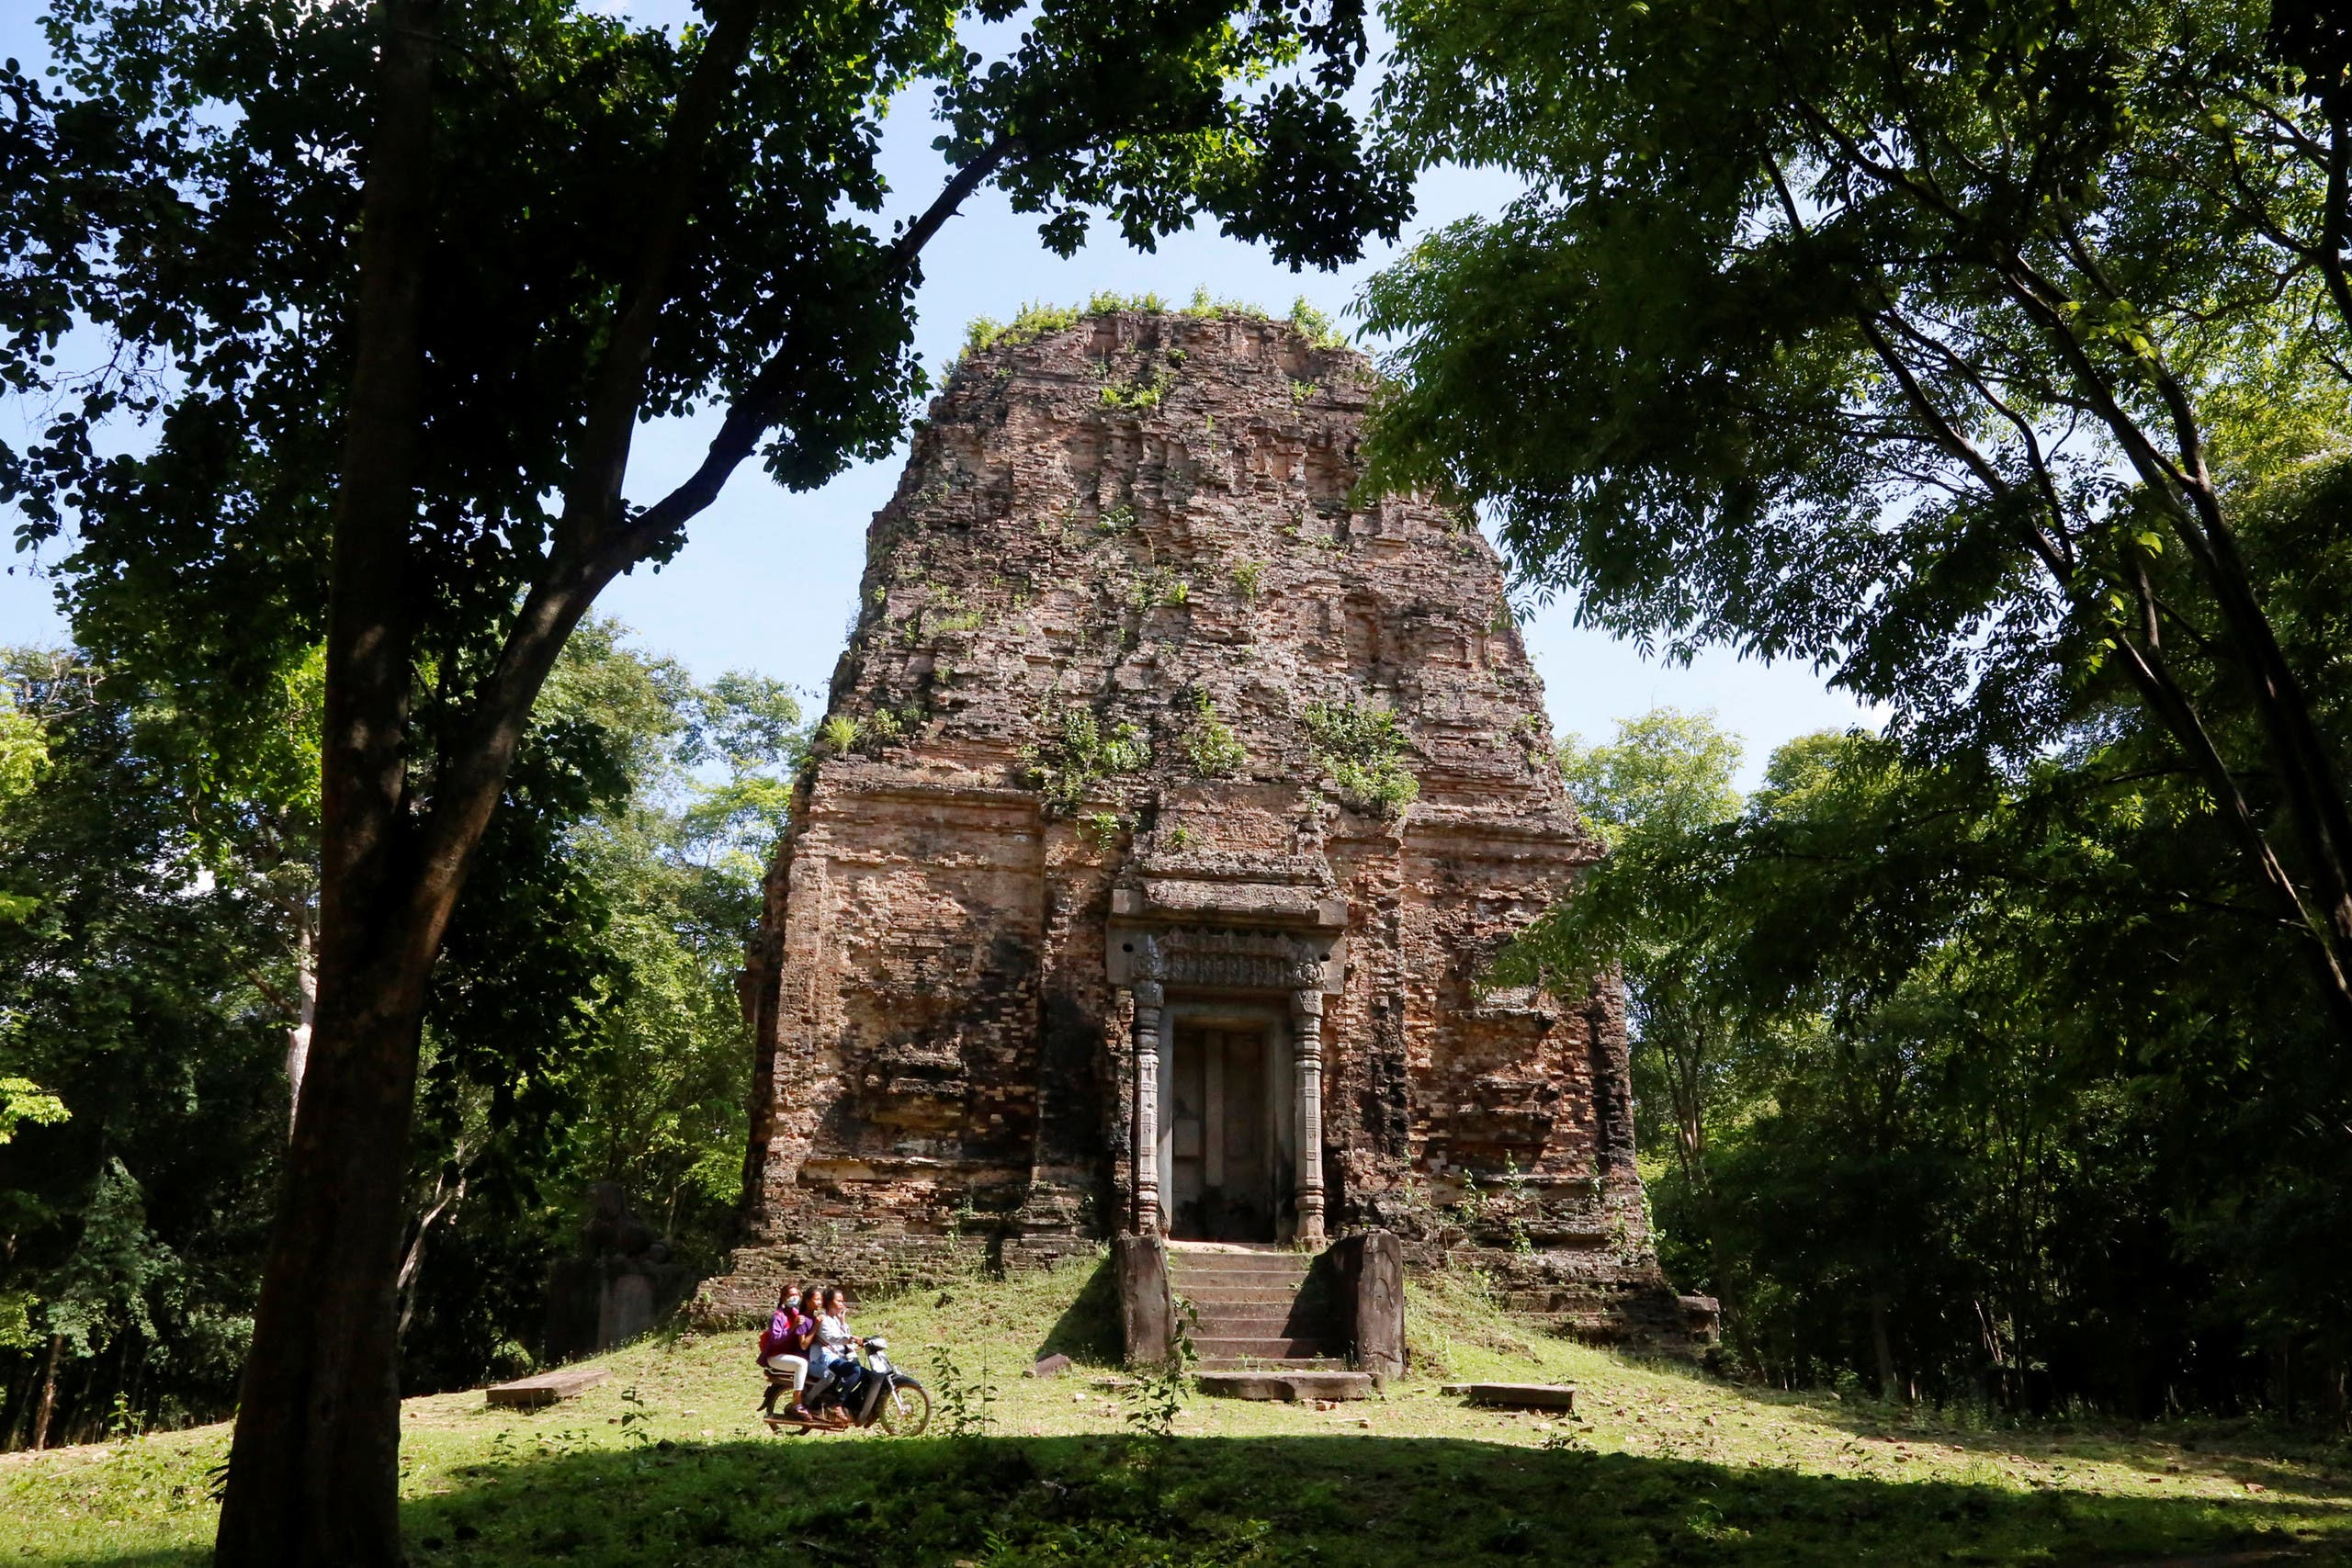 Sambor Prei Kuk temple, an archaeological site of Ancient Ishanapura, is seen in Kampong Thom province, Cambodia May 20, 2017. Reuters)